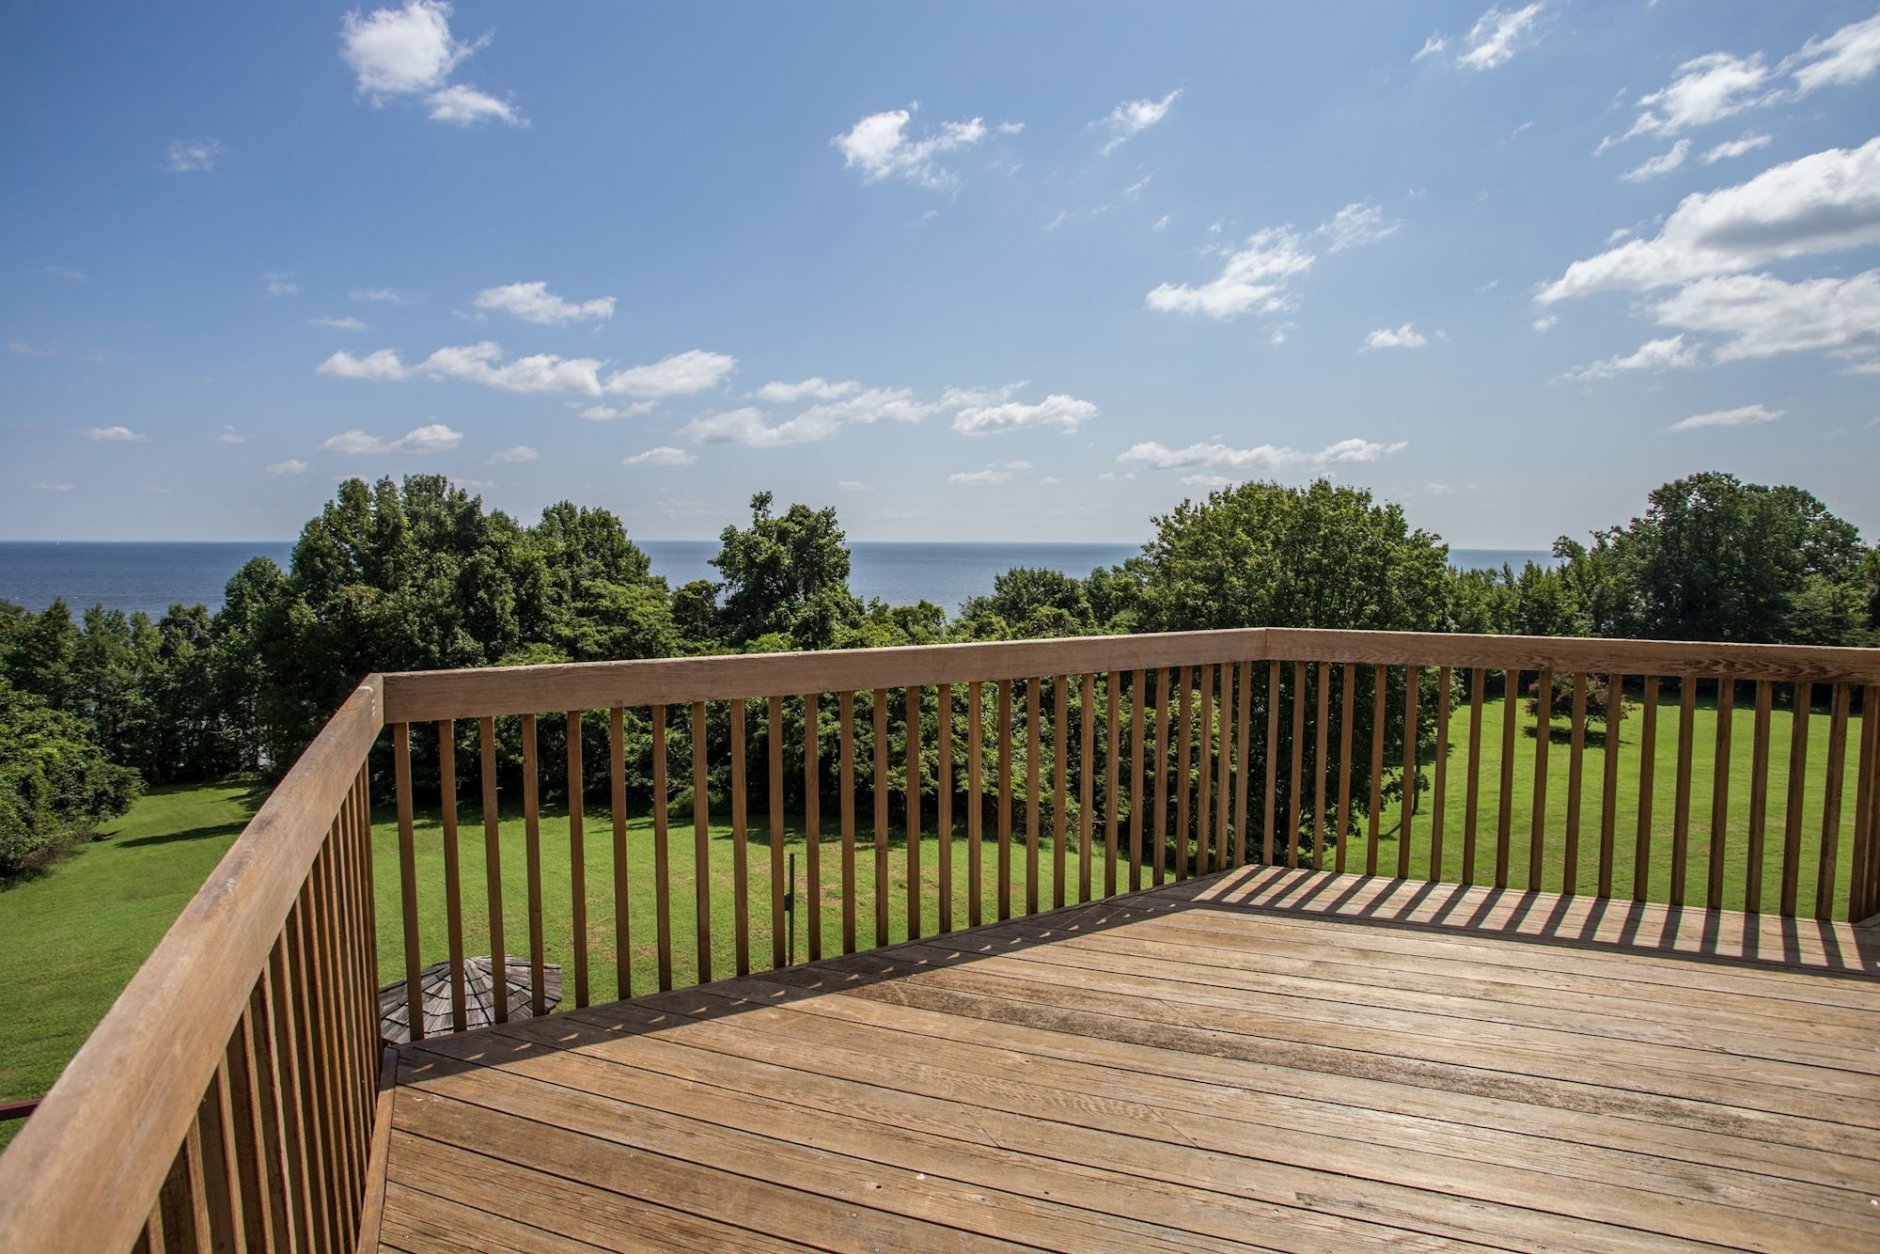 A view of the woods and the Chesapeake Bay from one of the decks at Tom Clancy's estate. (Courtesy Cummings & Co. Realtors)